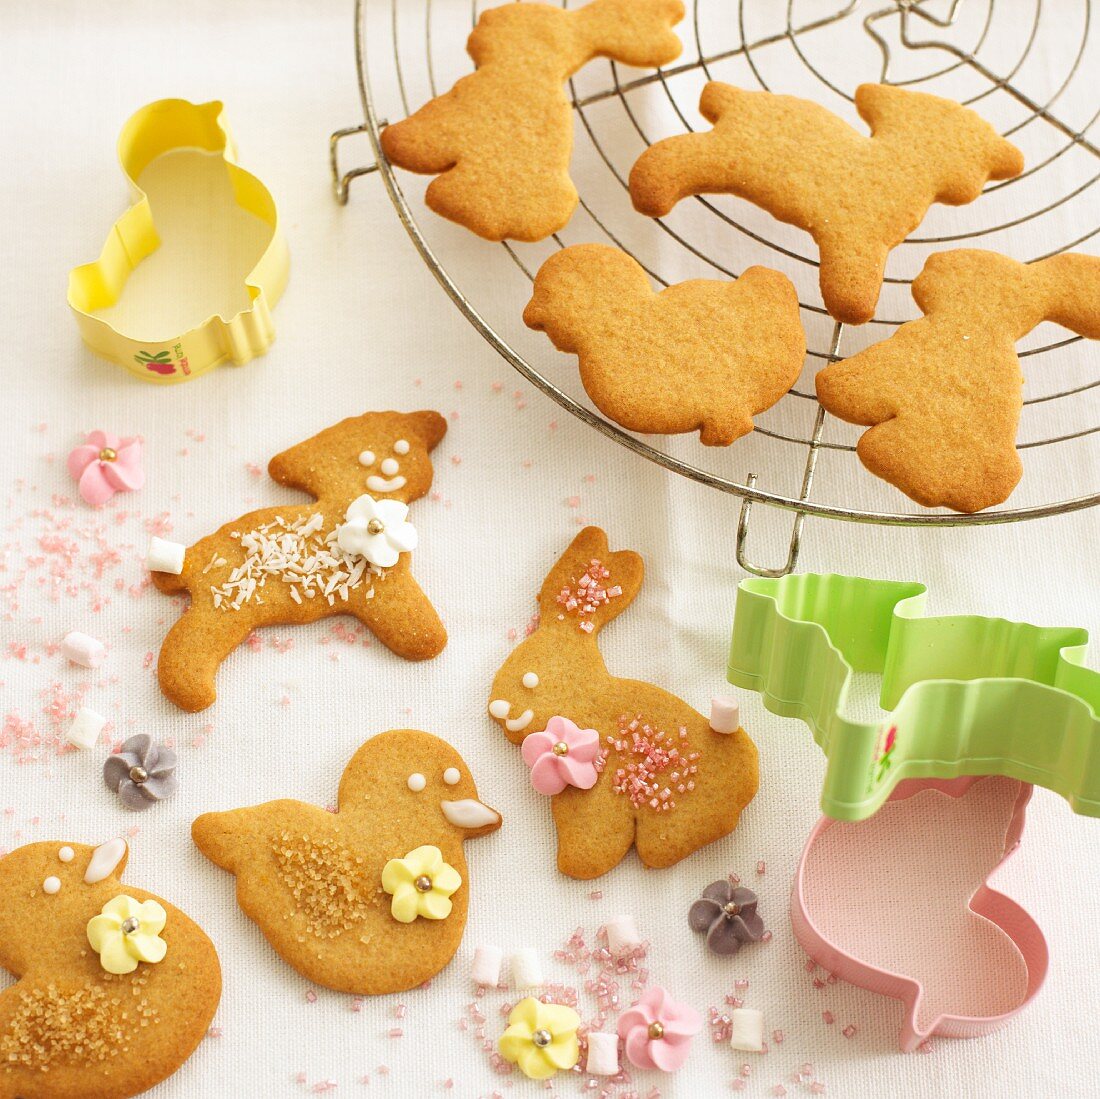 Assorted Easter biscuits